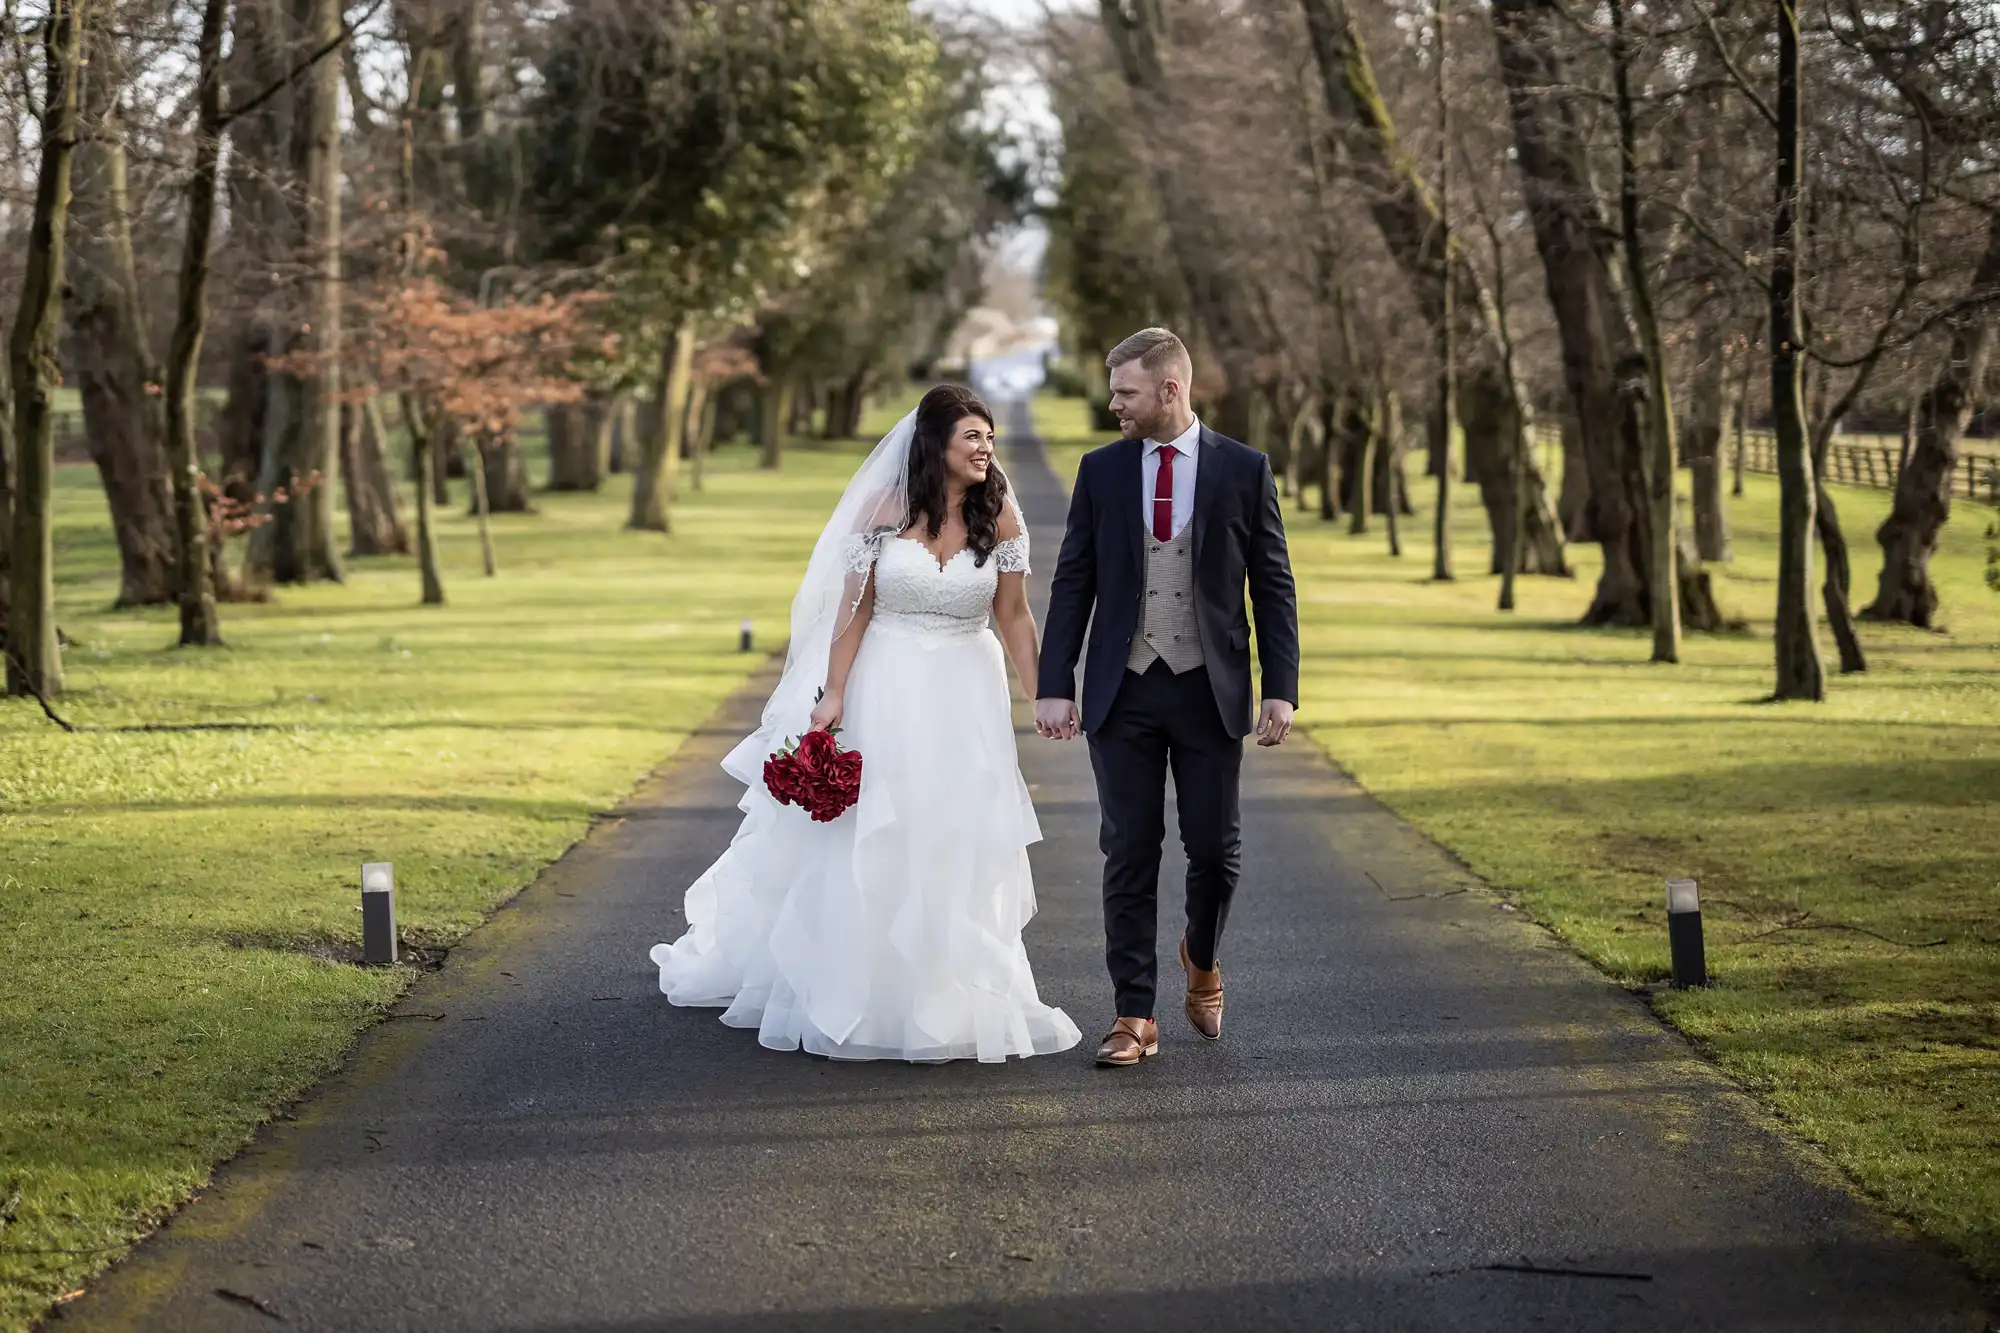 A couple in wedding attire walks hand in hand down a tree-lined path. The bride holds a red bouquet and wears a white dress with a veil, while the groom wears a suit with a red tie.